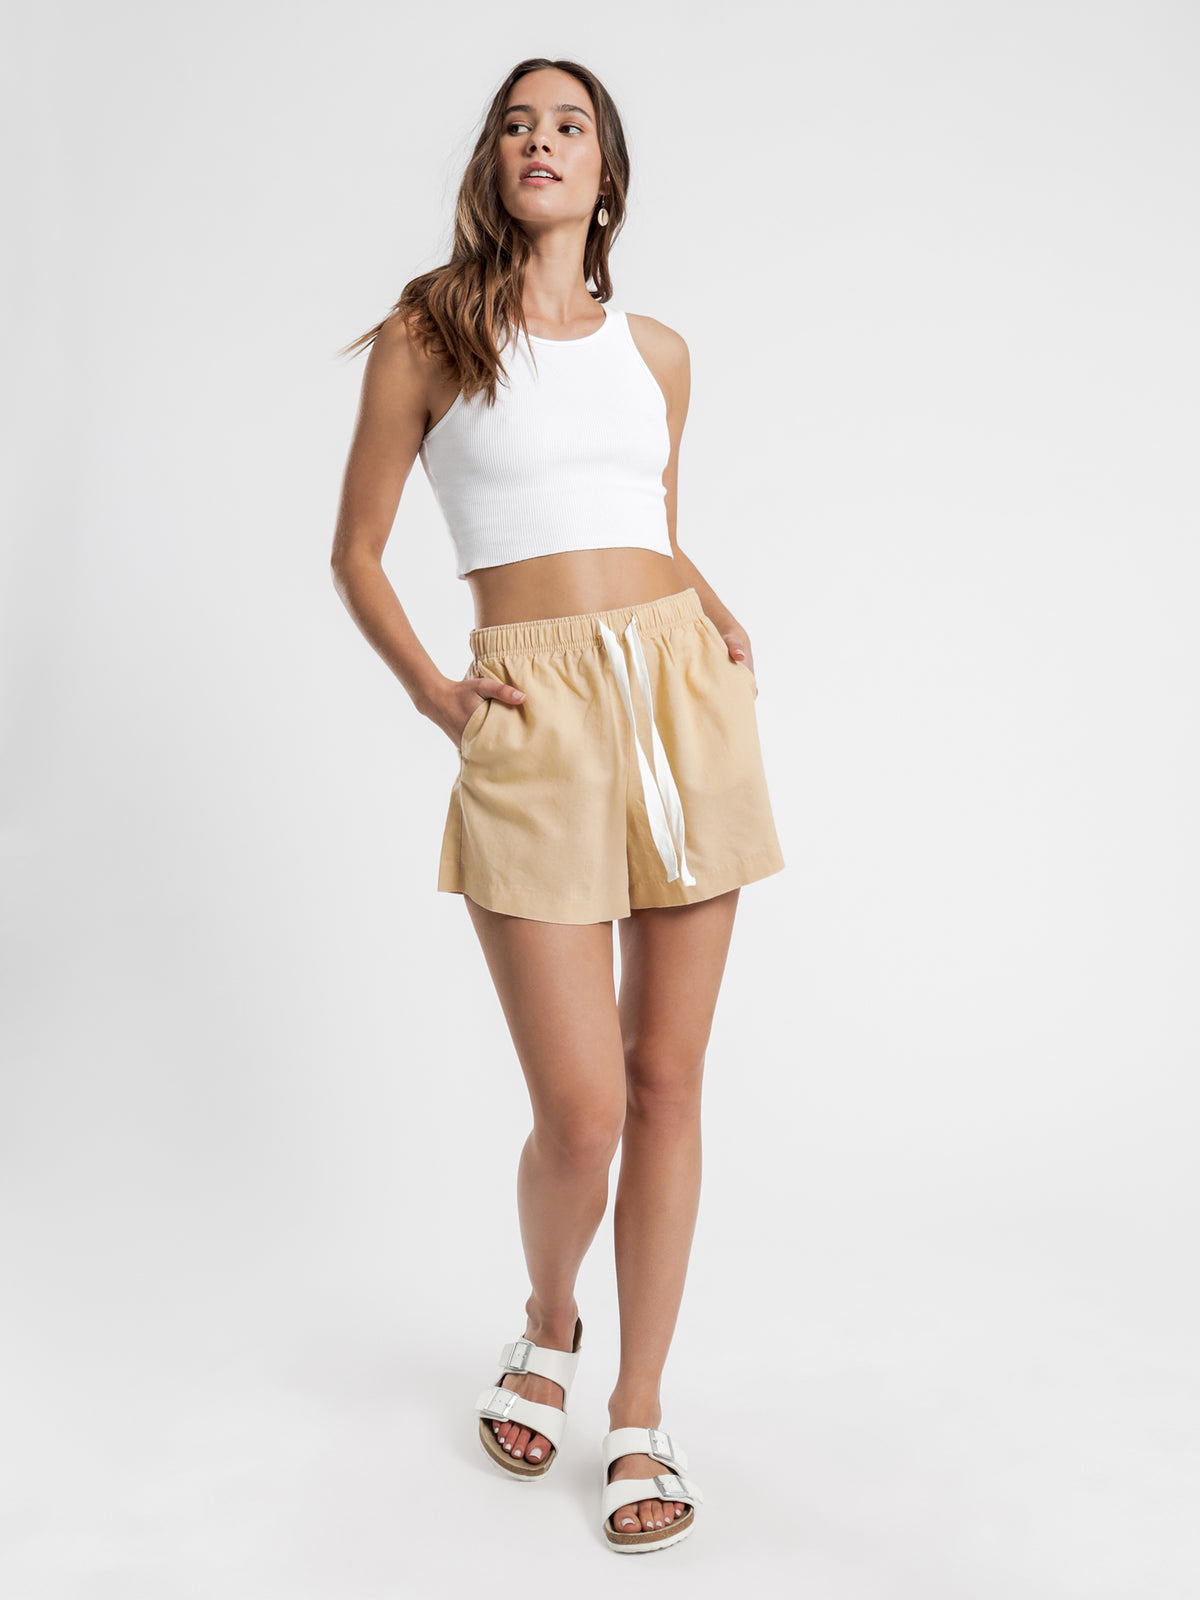 Nude Classic Shorts in Apricot